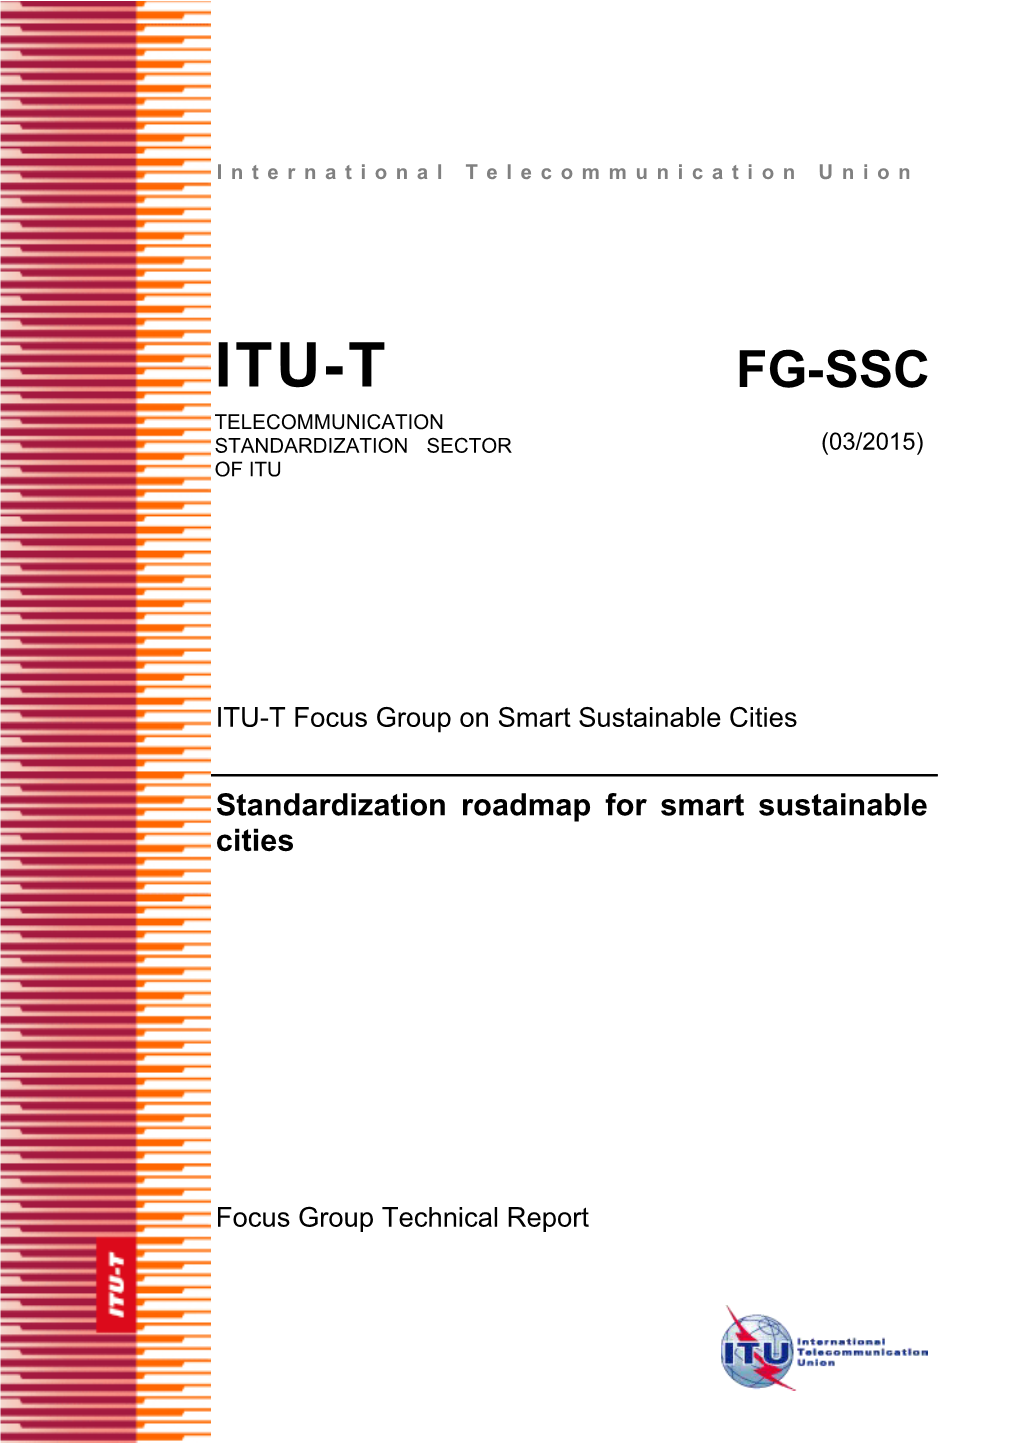 Standardization Roadmap for Smart Sustainable Cities